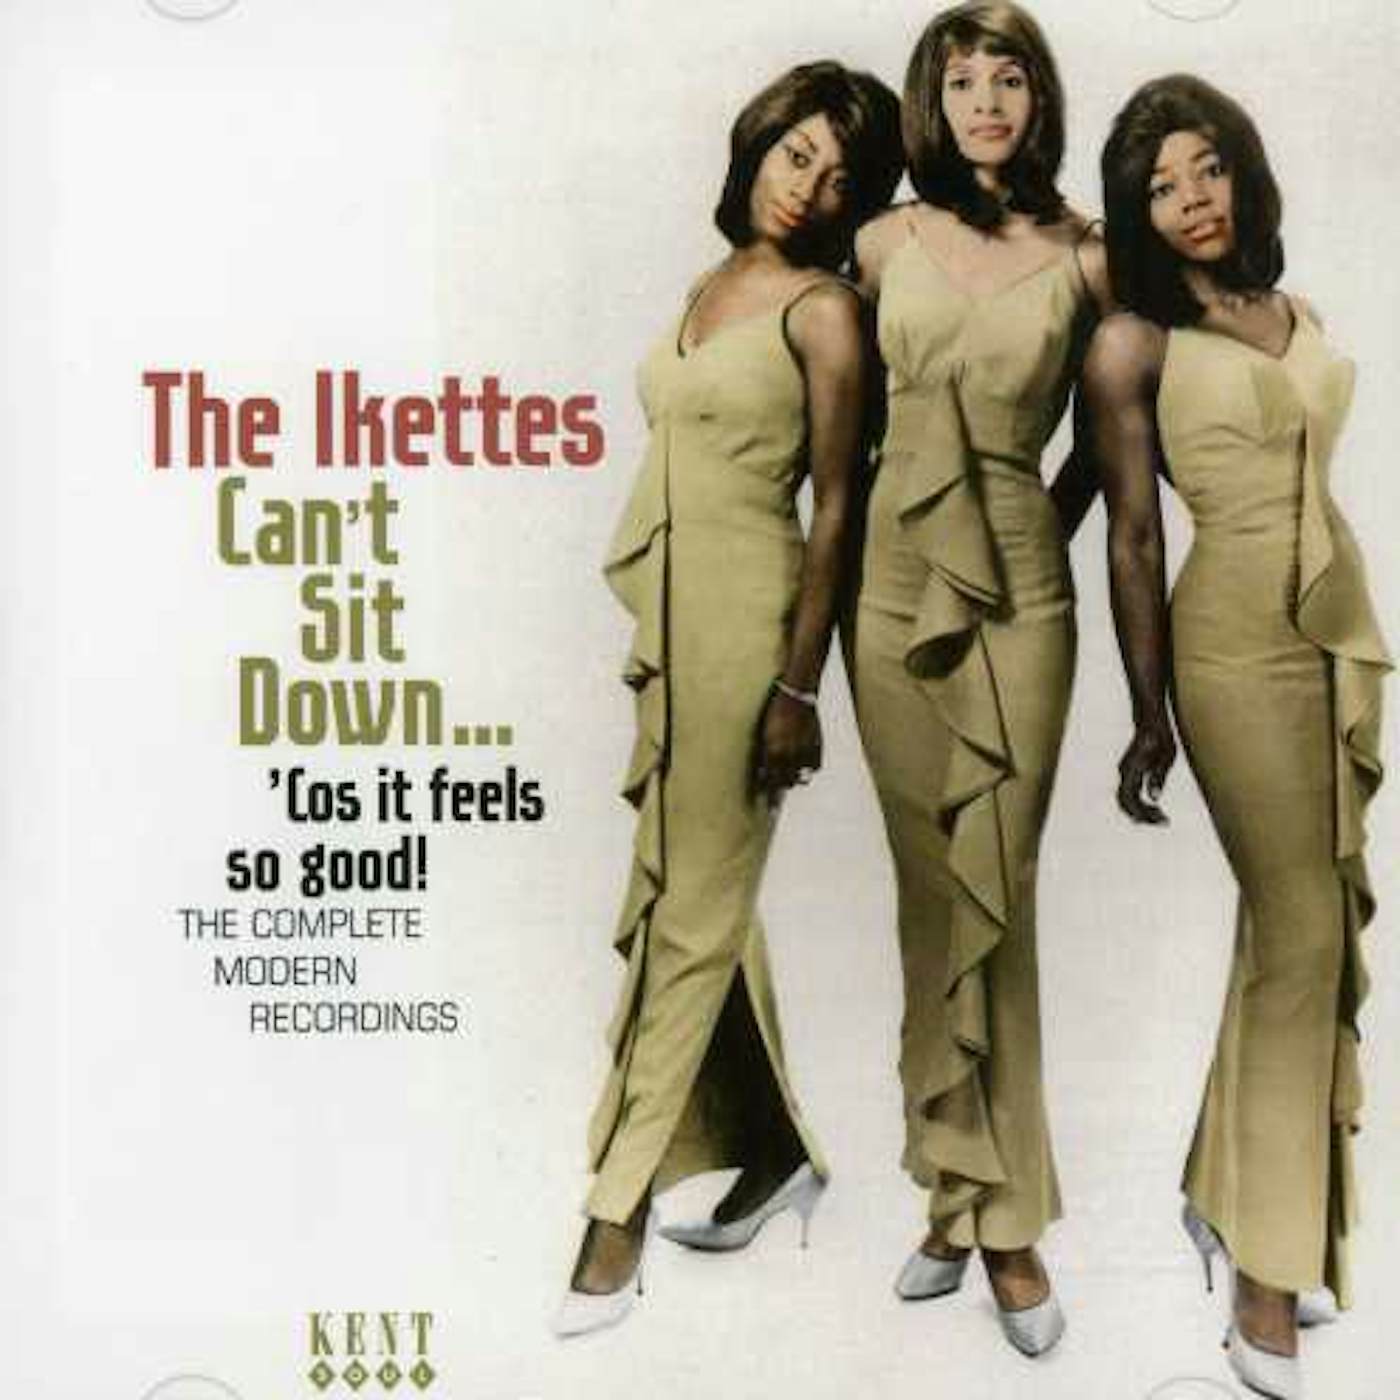 The Ikettes CAN'T SIT DOWN: COS IT FEELS SO GOOD - COMPLETE CD